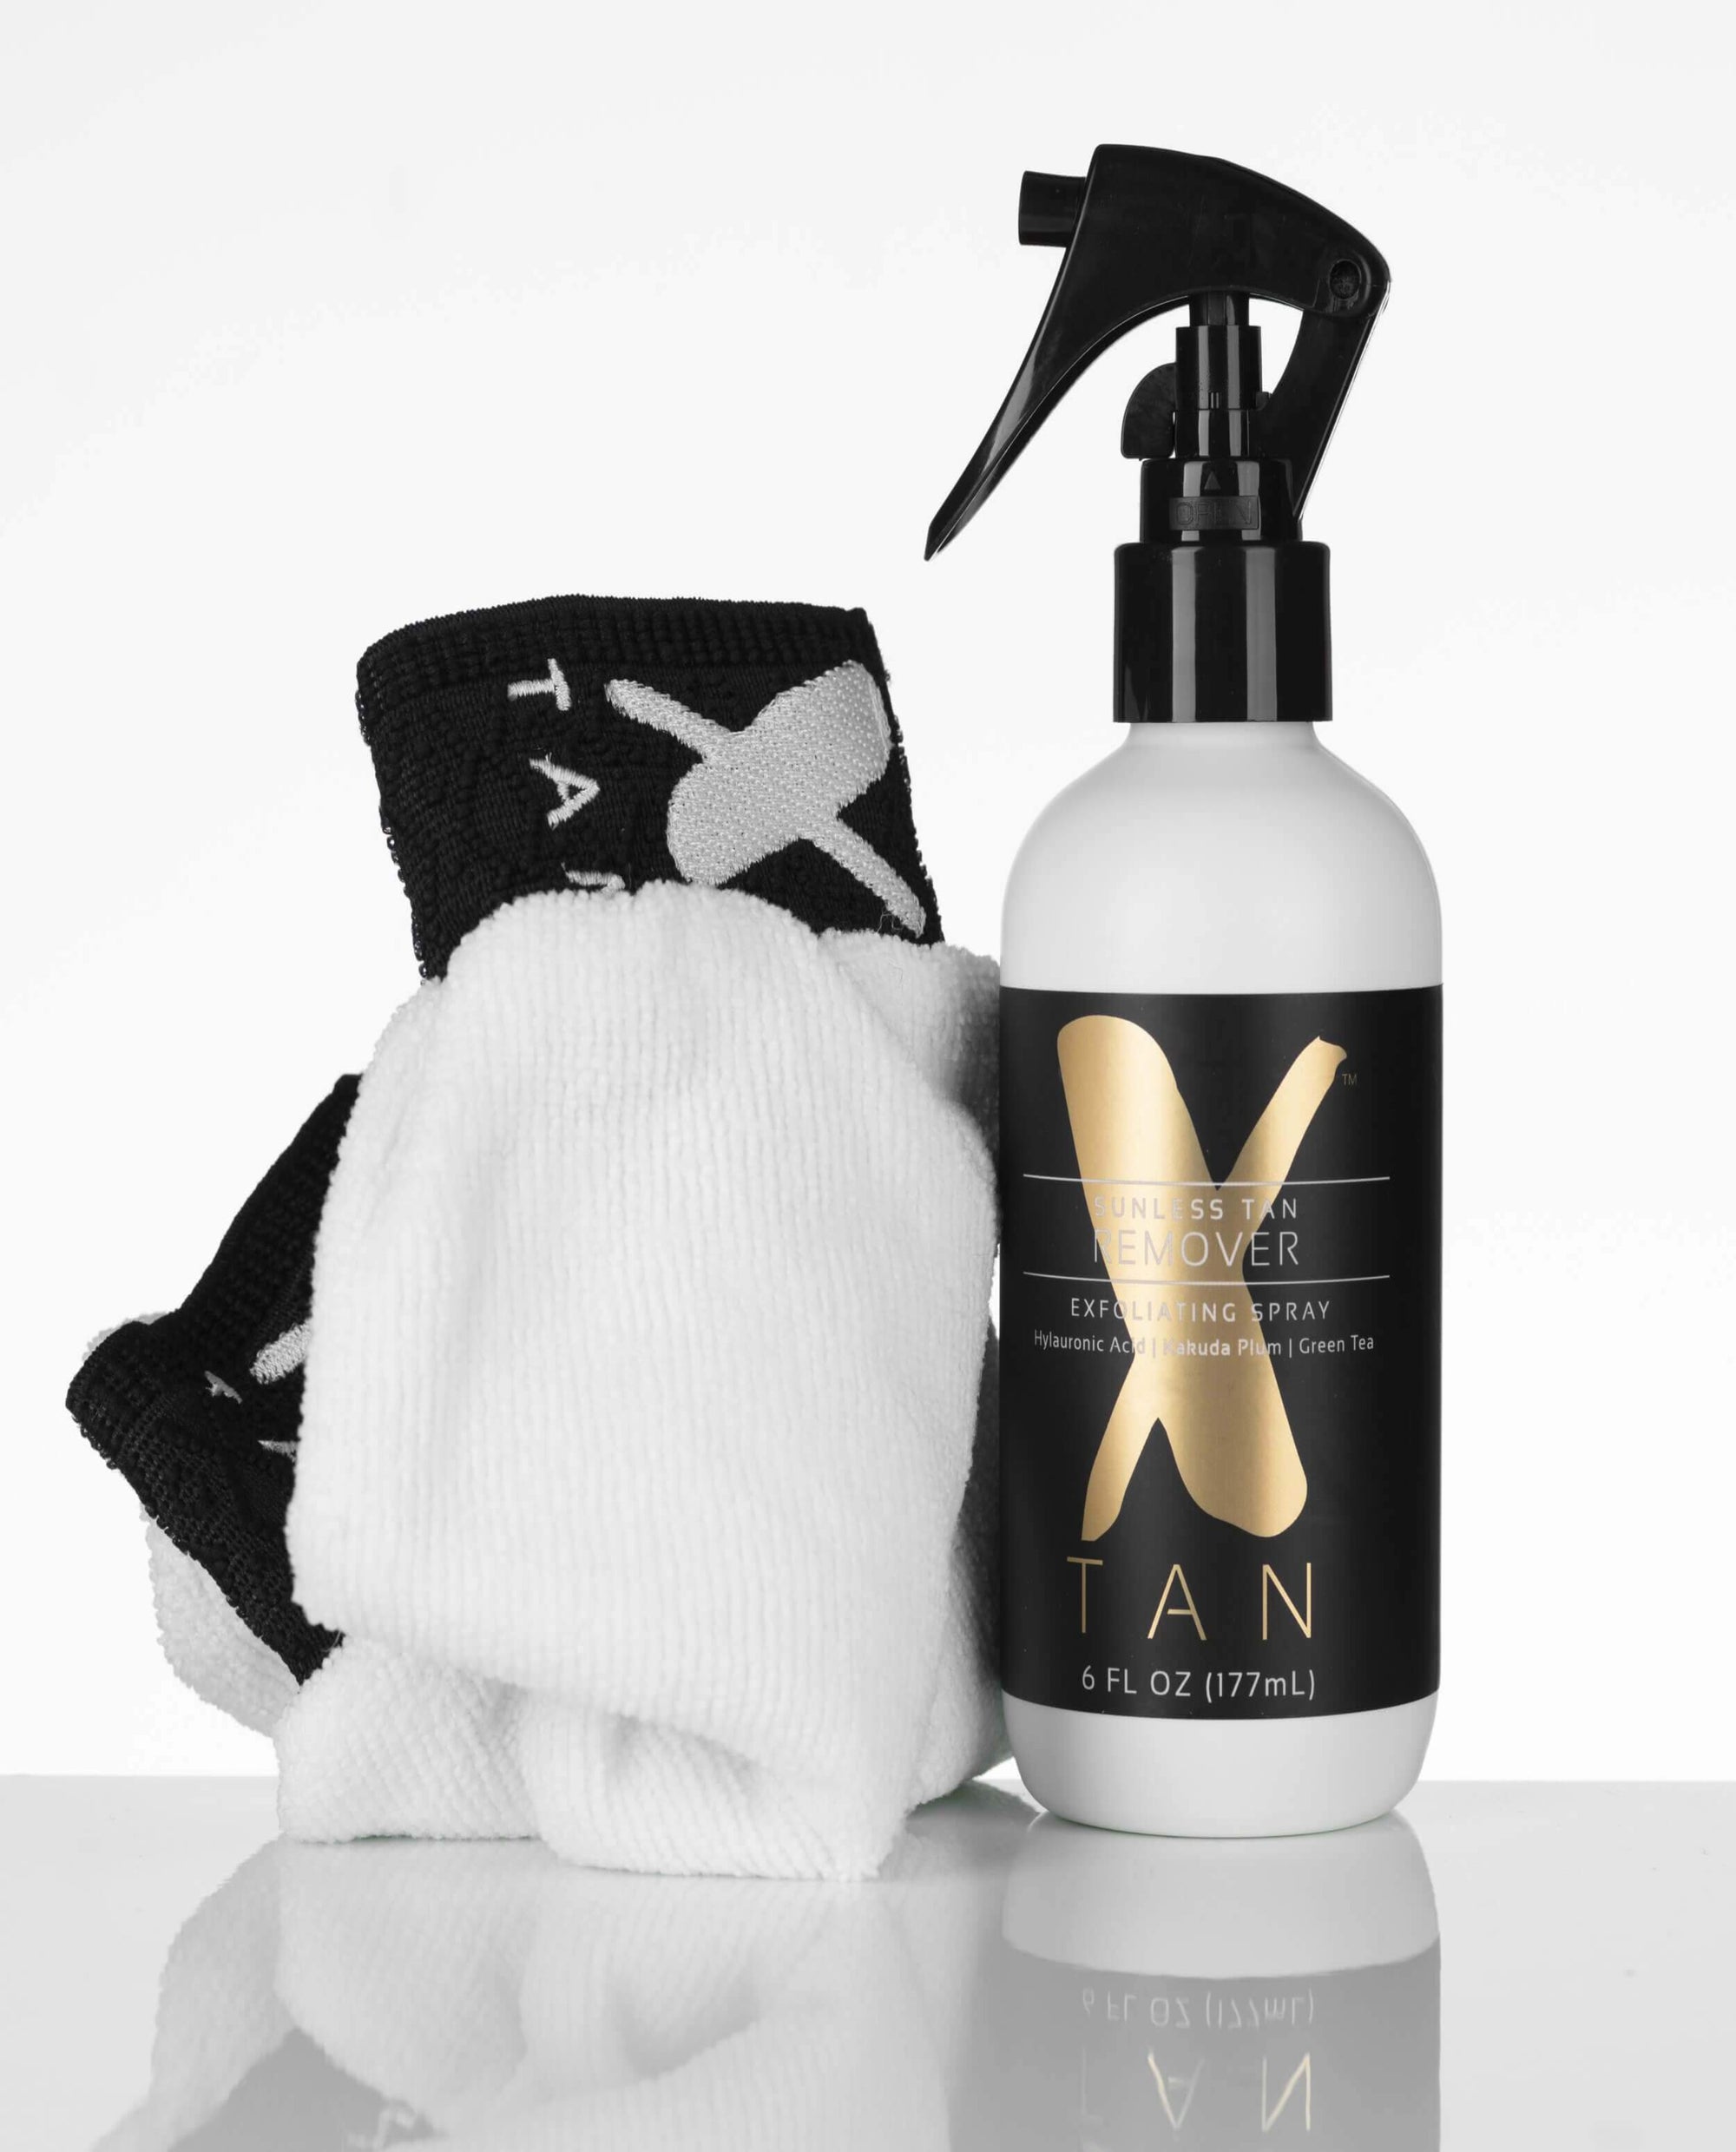 X-TAN Sunless Tan Removing Spray + Glove - Elevate Beauty Store